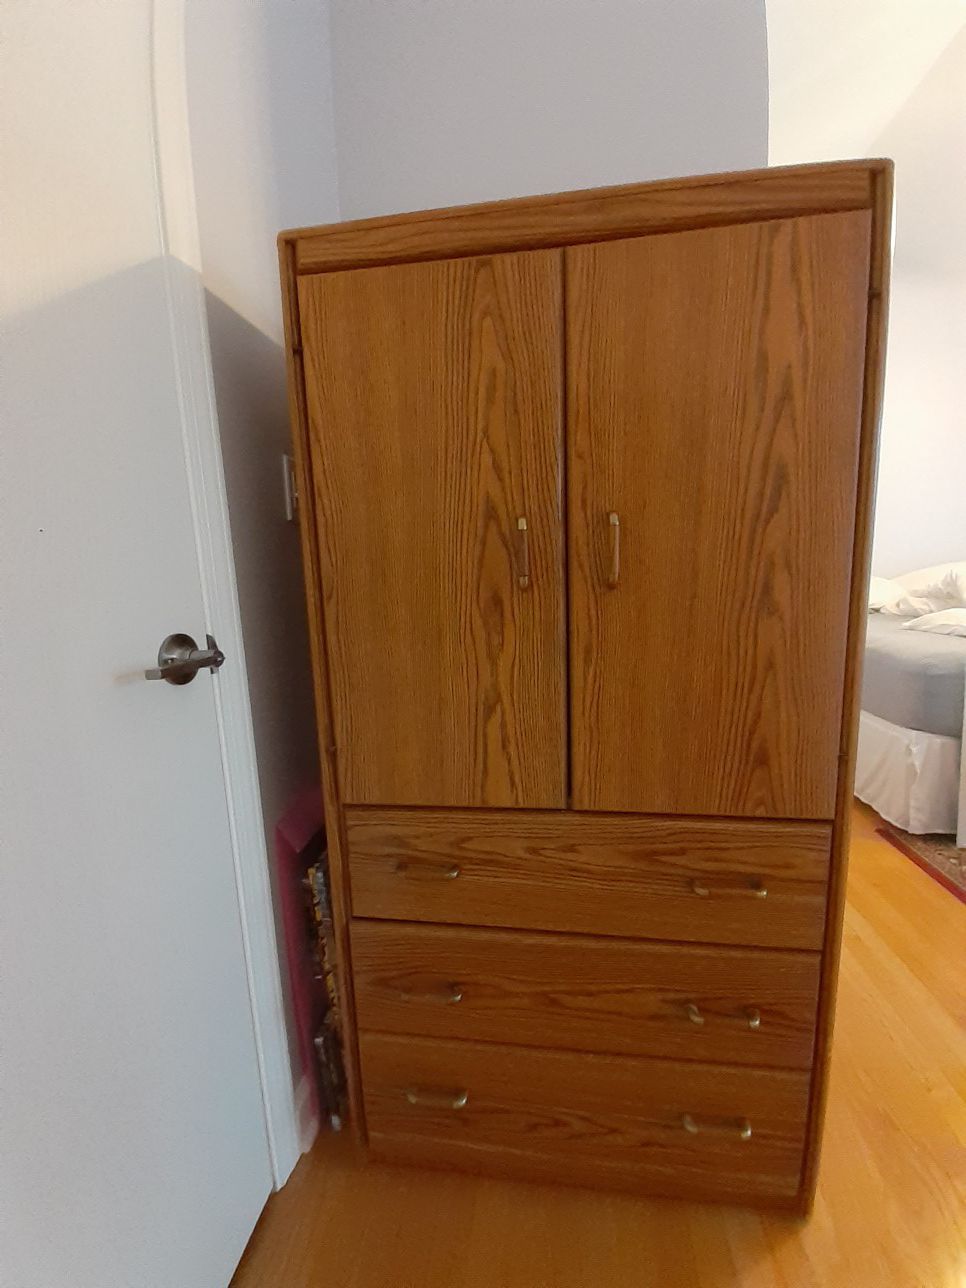 Airmoire / Wardrobe - lots of space, practical